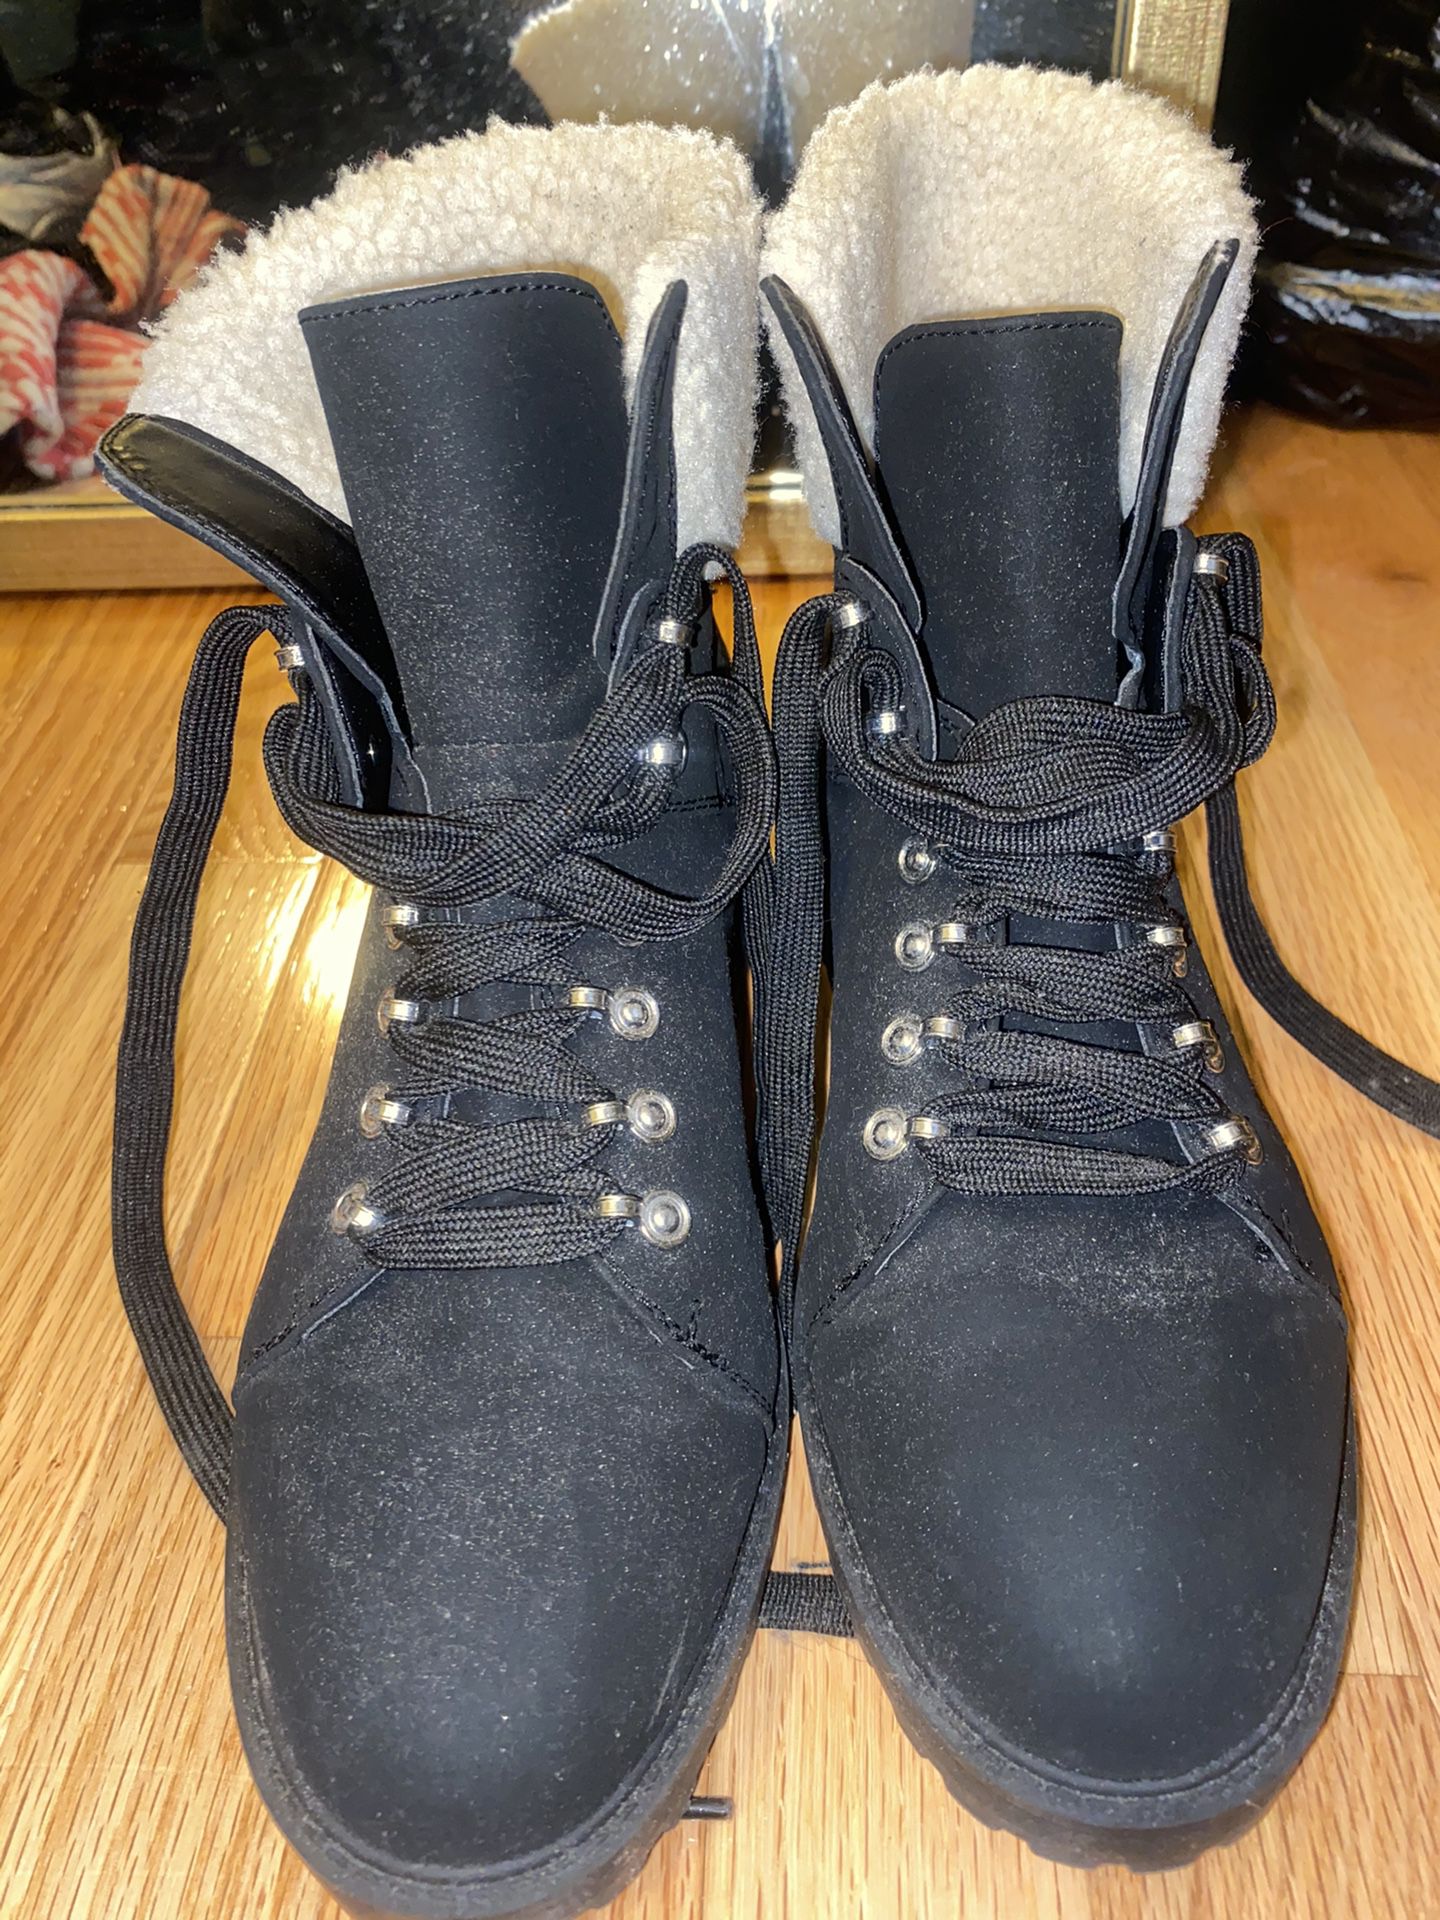 Forever 21 Winter boots